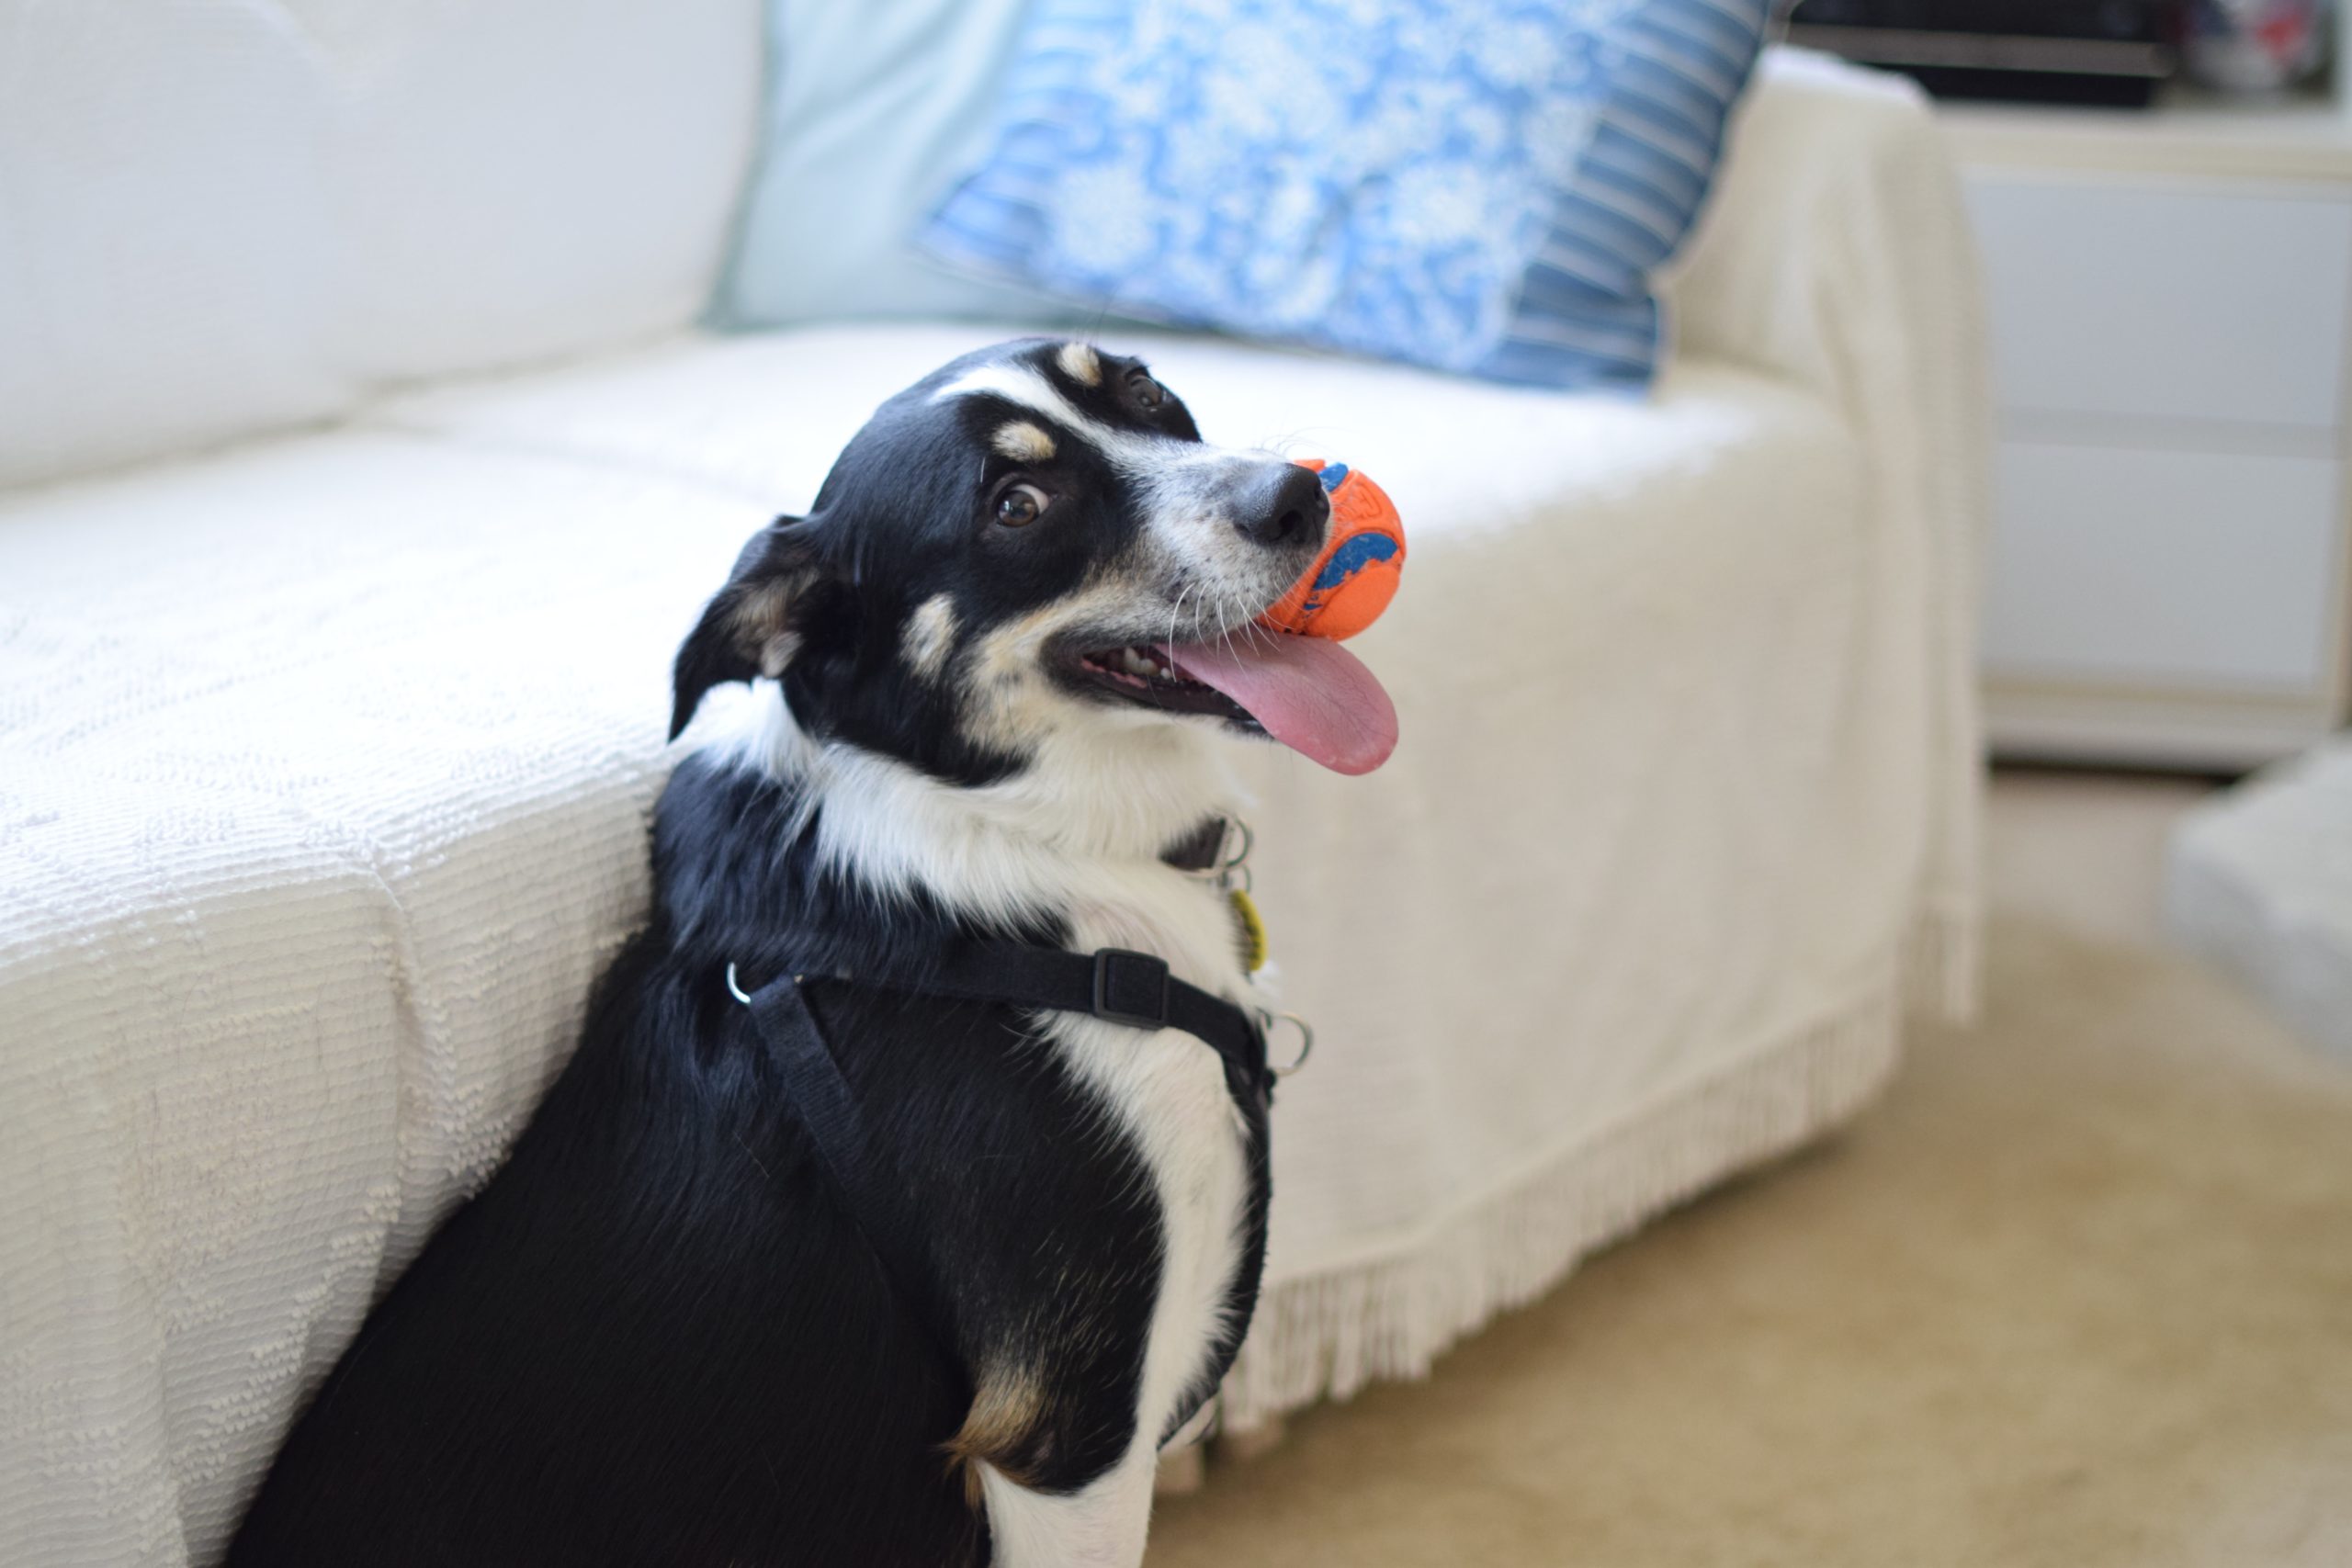 Black and white dog with an orange toy ball in its mouth